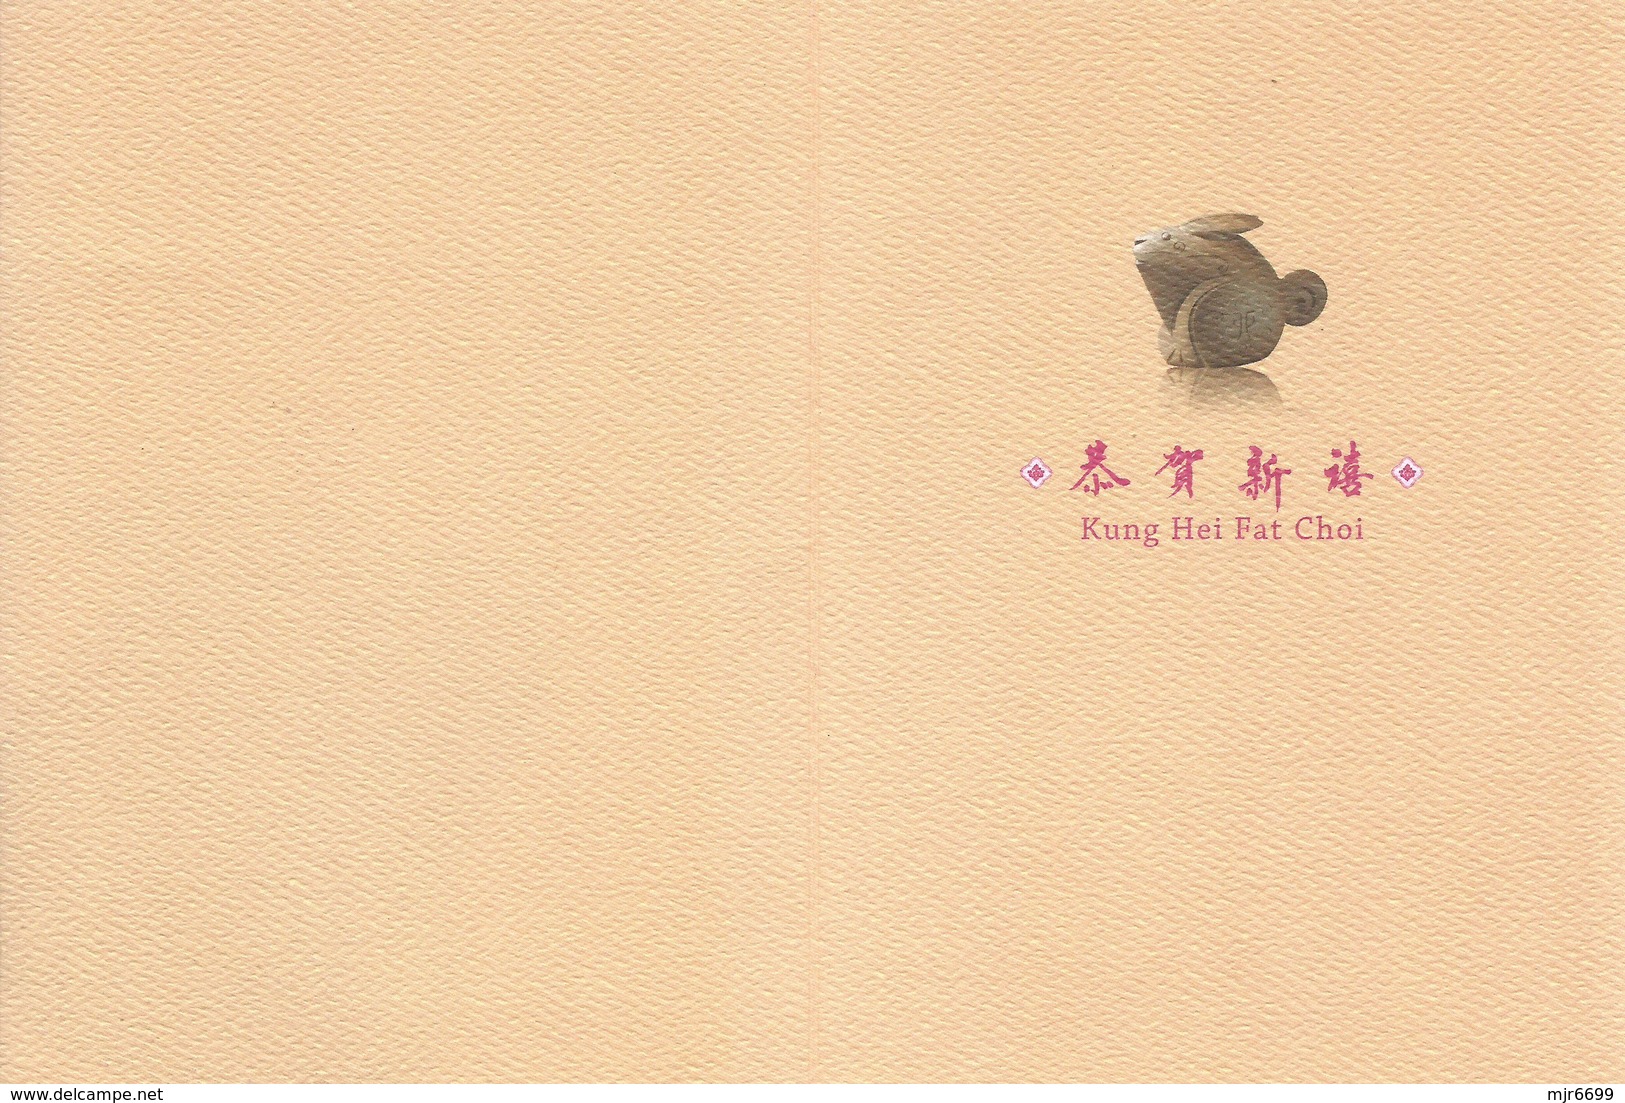 MACAU 2011 LUNAR YEAR OF THE RABBIT GREETING CARD & POSTAGE PAID COVER 1ST DAY USE WITH AREIA PRETA CDS - Postal Stationery